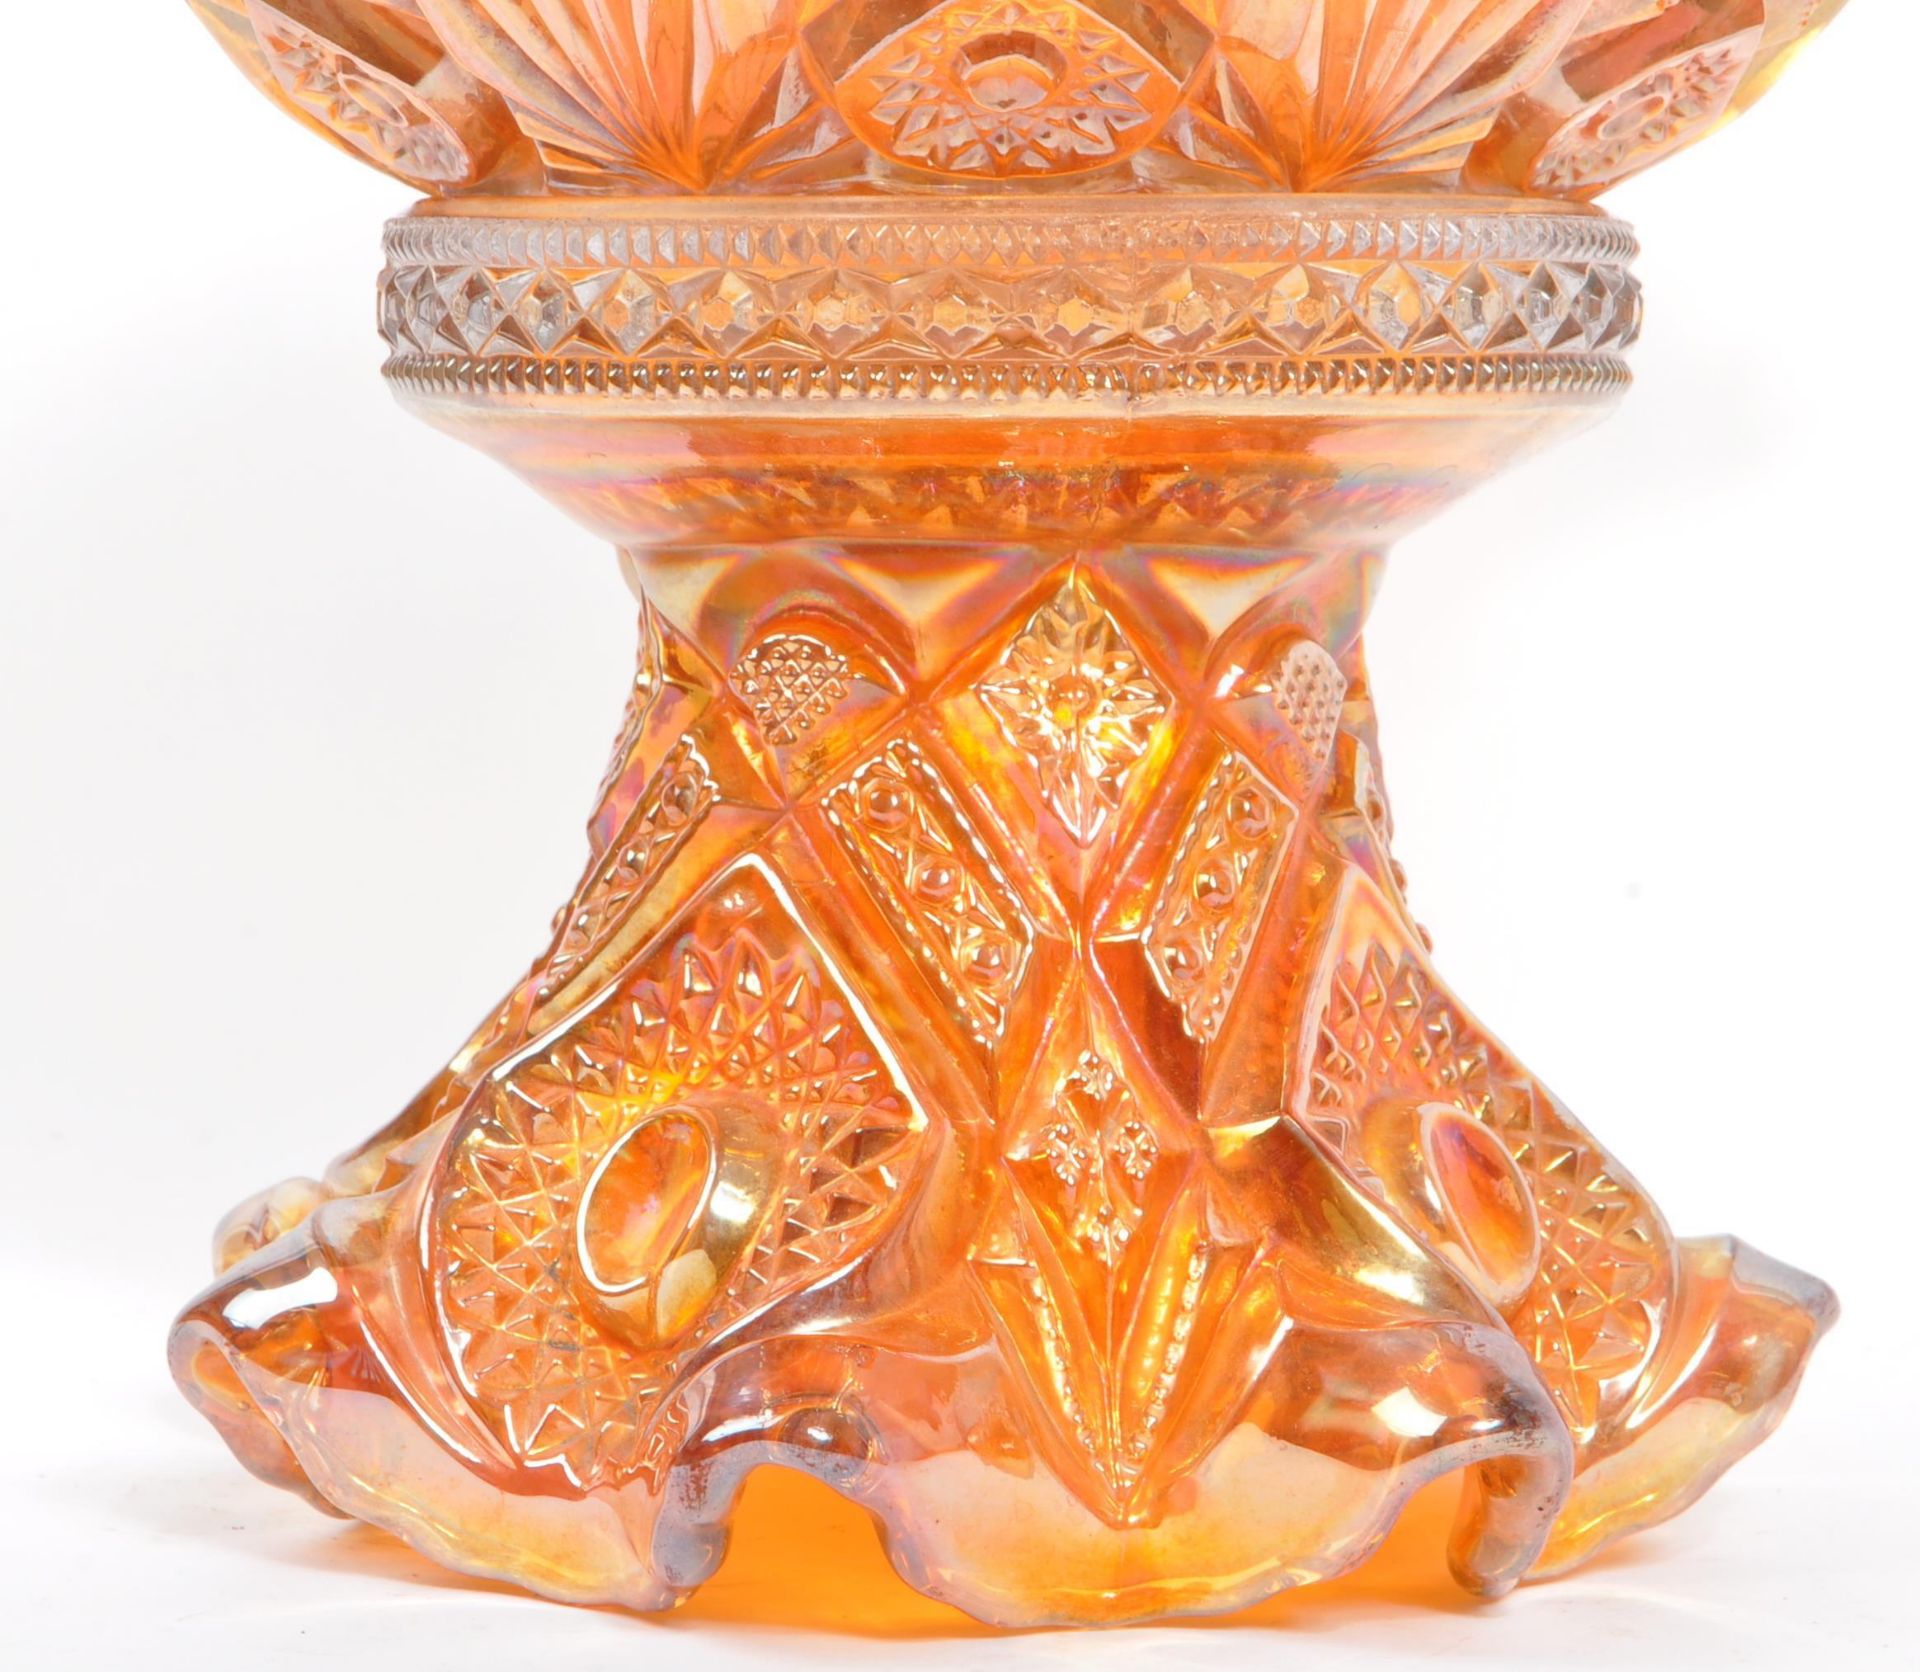 IRIDESCENT CARNIVAL GLASS MARIGOLD PUNCH BOWL - Image 5 of 10